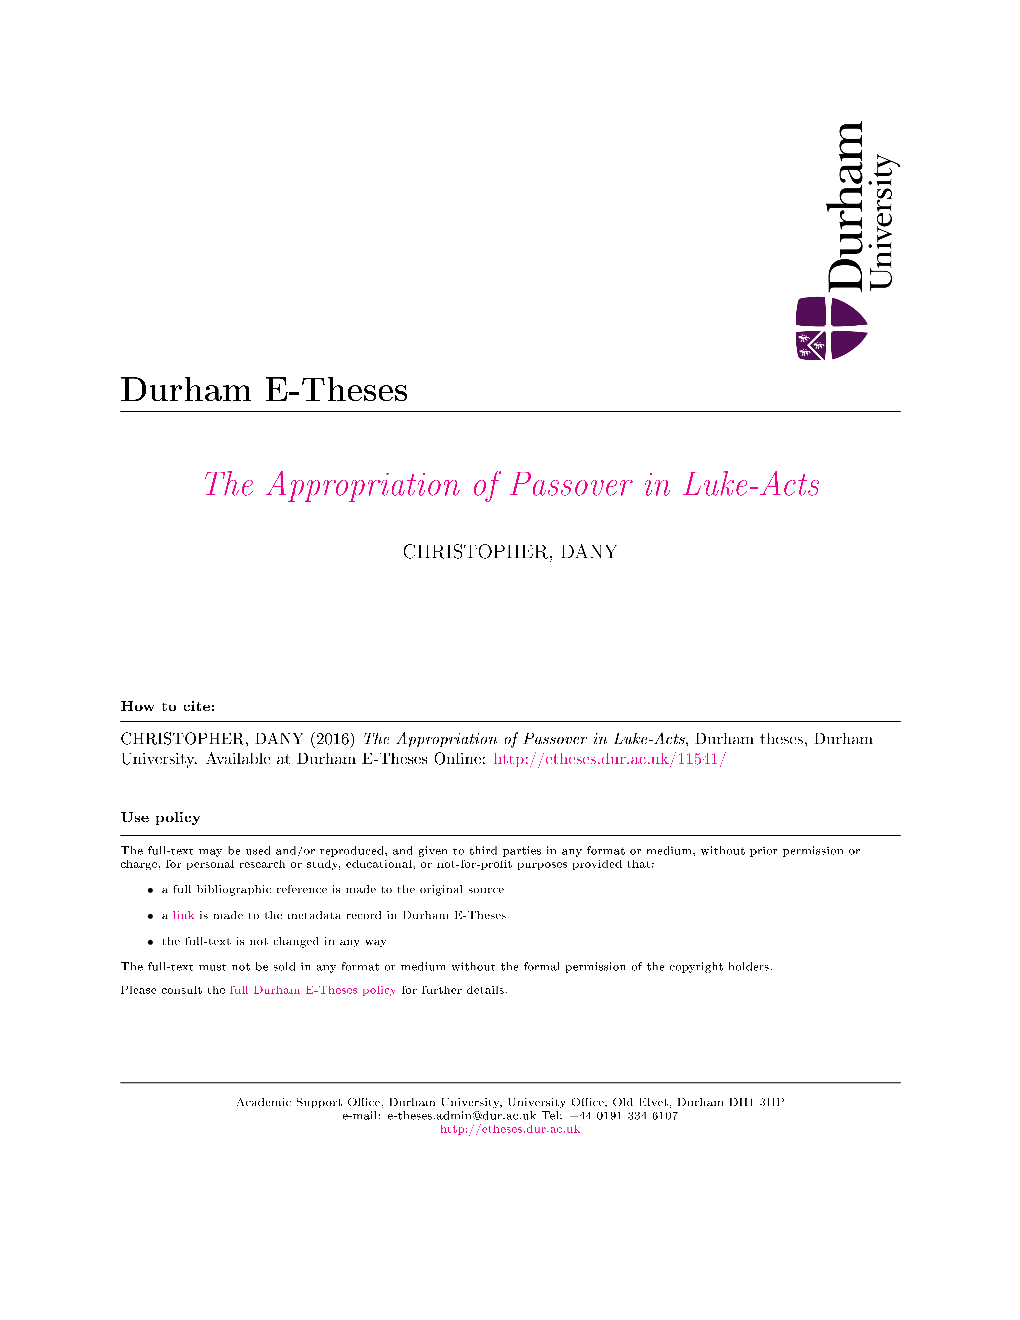 CHRISTOPHER, DANY (2016) the Appropriation of Passover in Luke-Acts, Durham Theses, Durham University